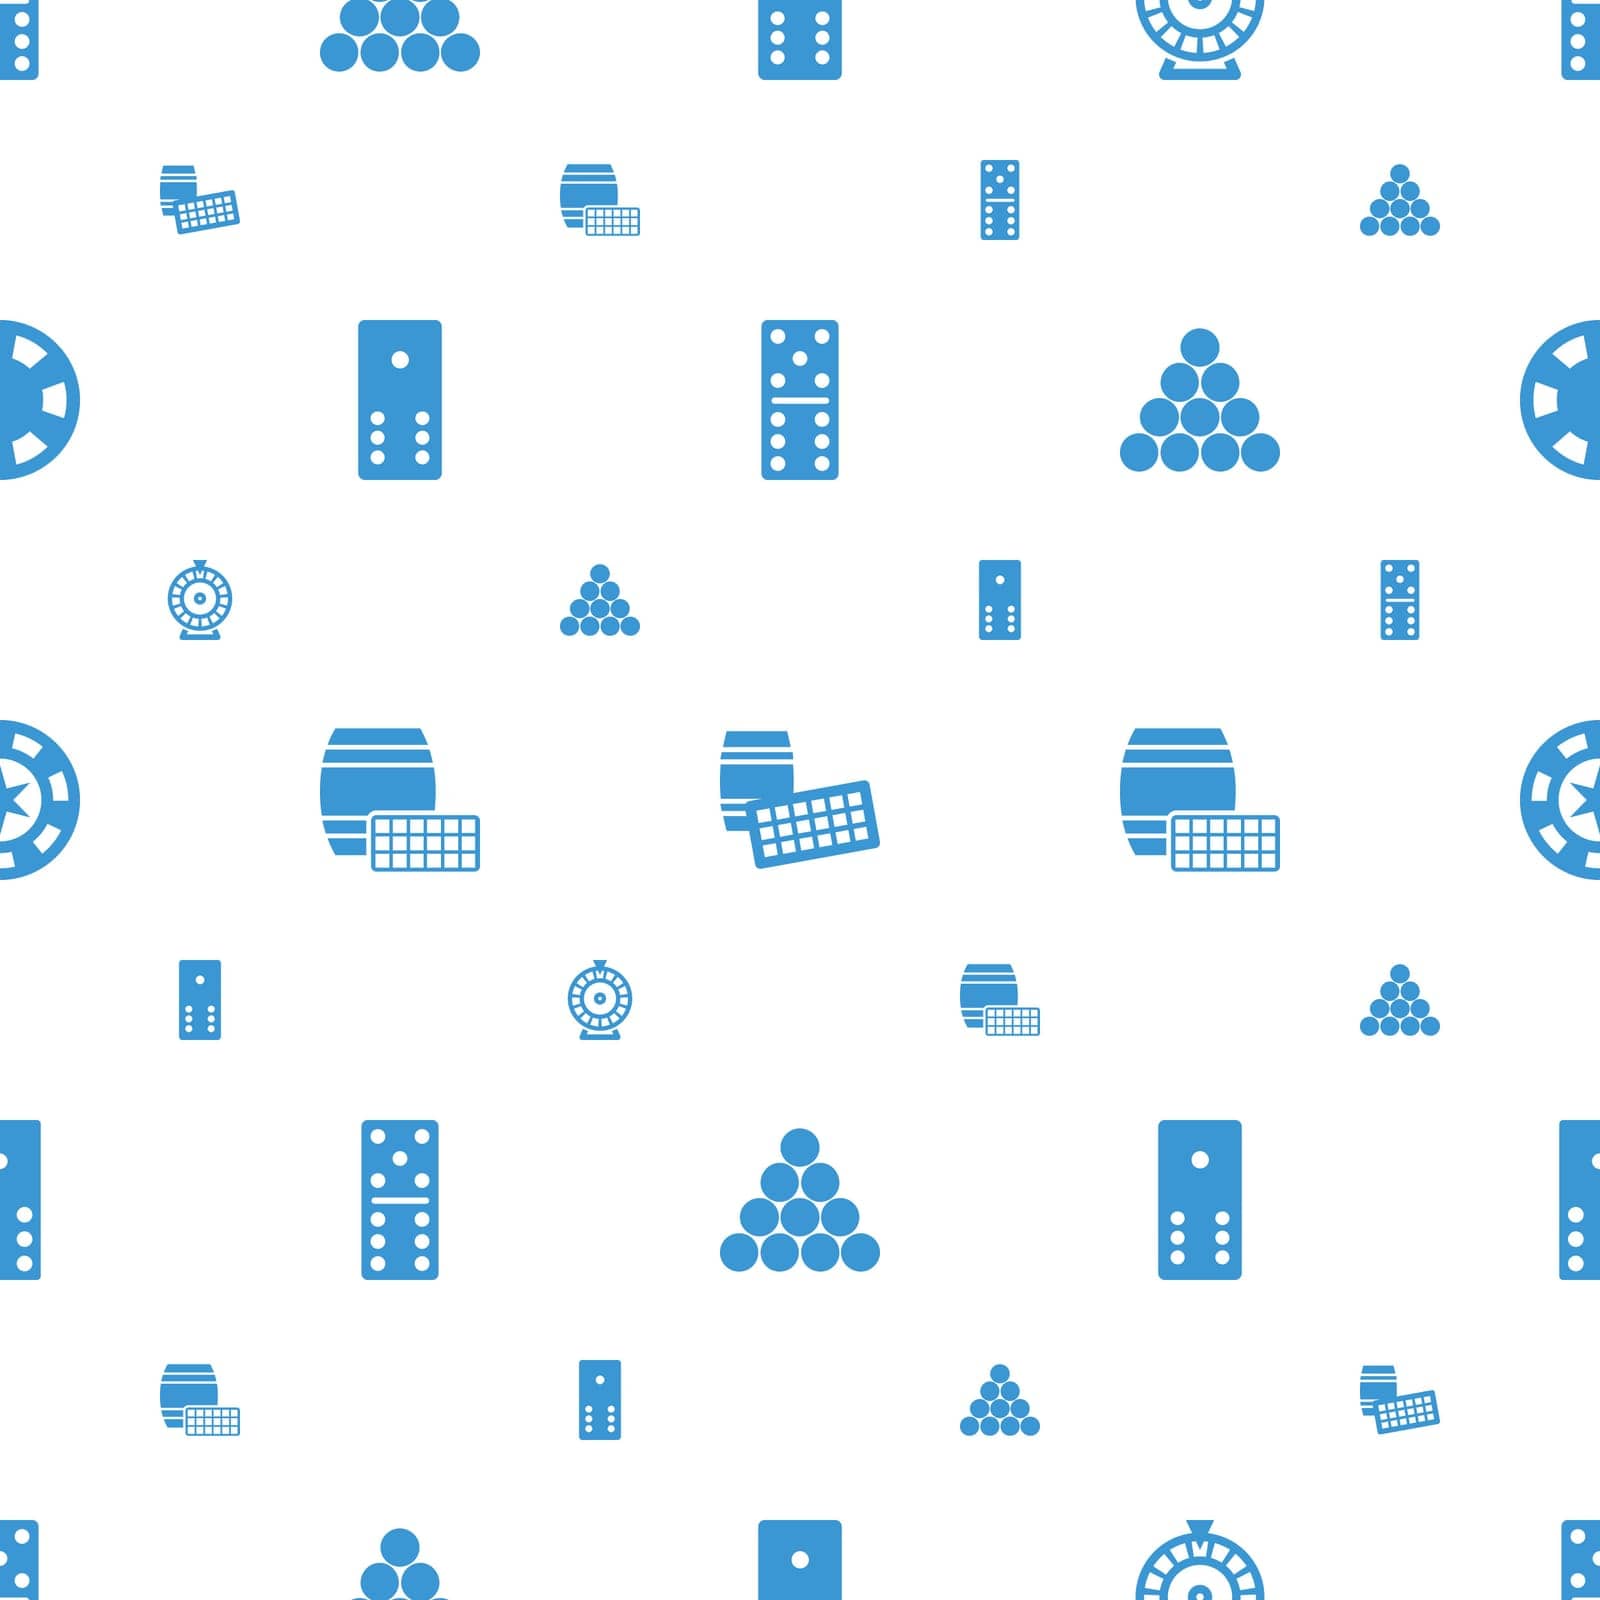 play,symbol,game,luck,color,activity,entertainment,pattern,icon,sign,isolated,gambling,casino,triangle,bet,ball,number,white,web,flat,roulette,design,logo,vector,domino,win,leisure,table,element,chip,set,shape,gamble,black,lotto,background,success,illustration,sport,biliard,object